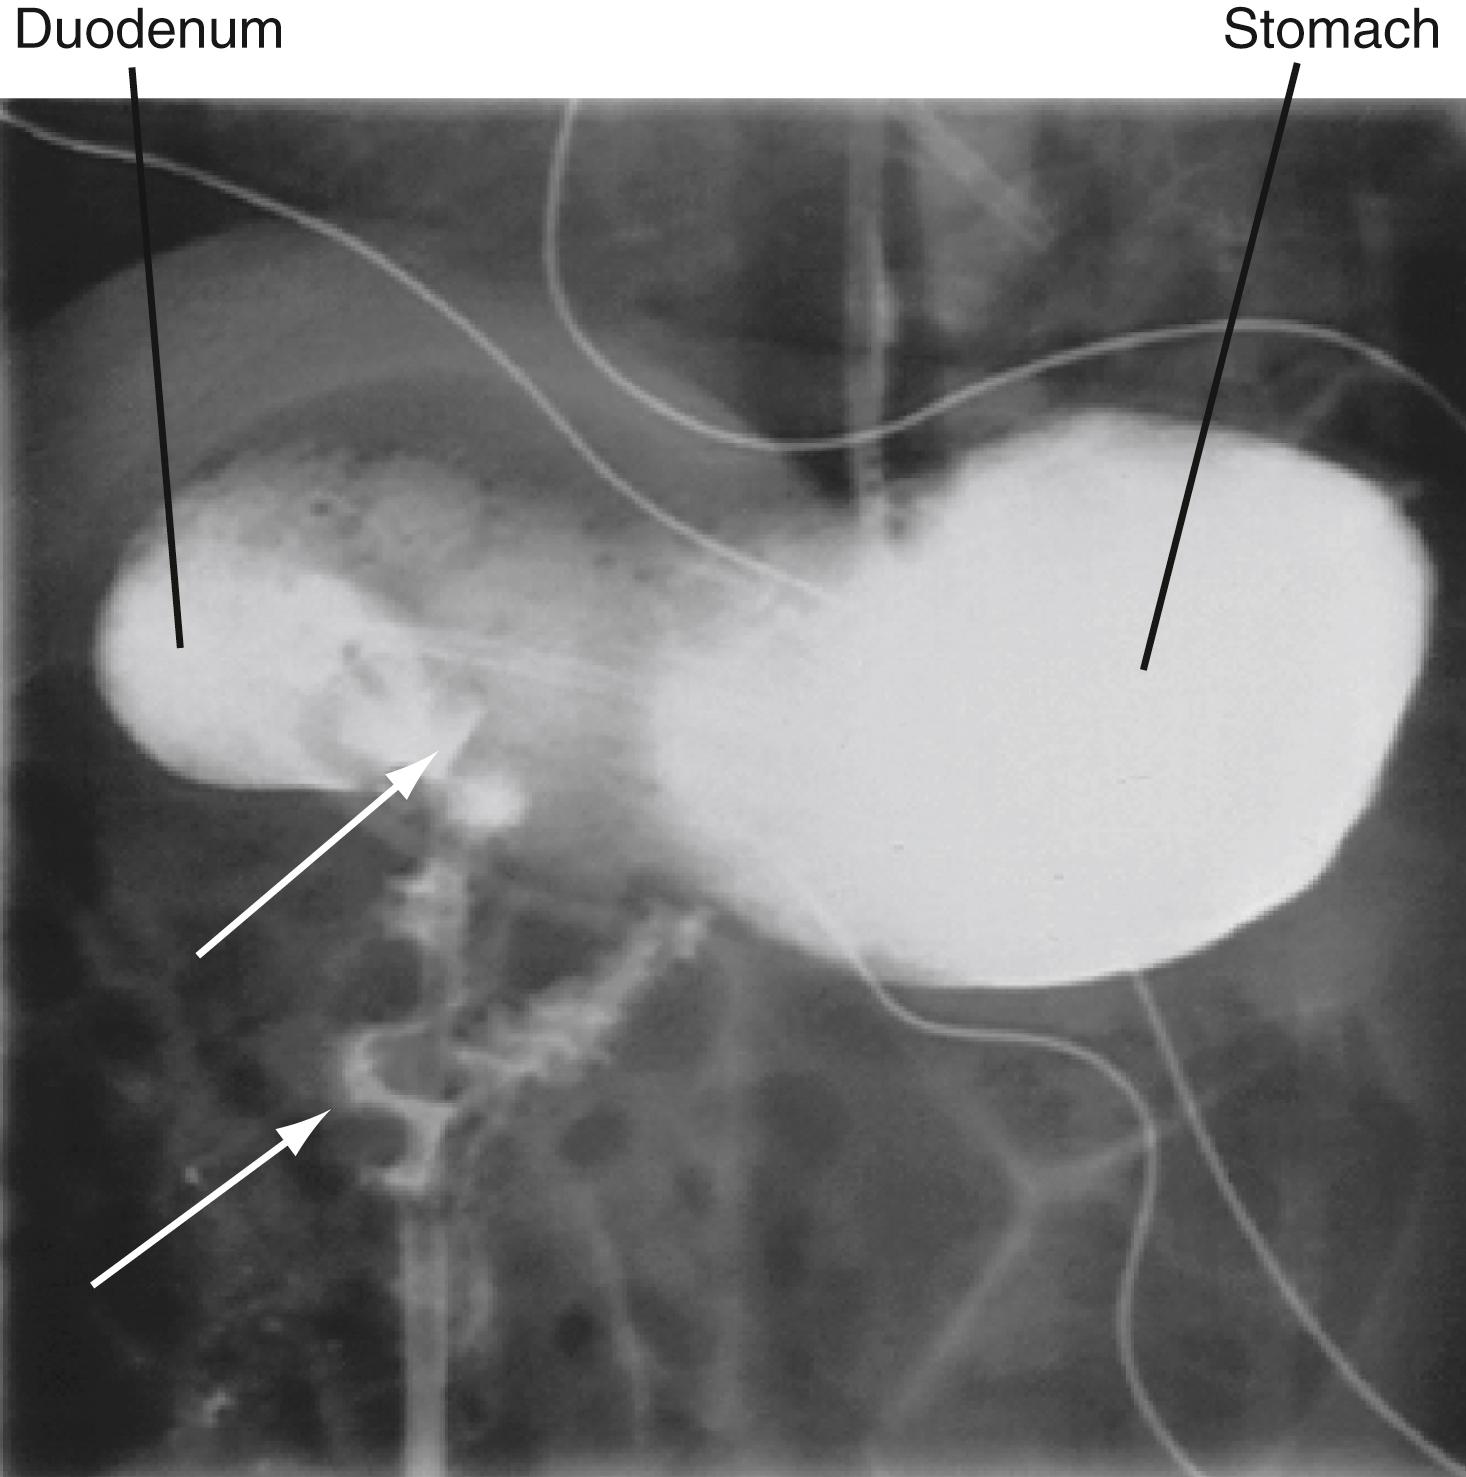 Fig. 14.1, Malrotation of the Gut in a Child